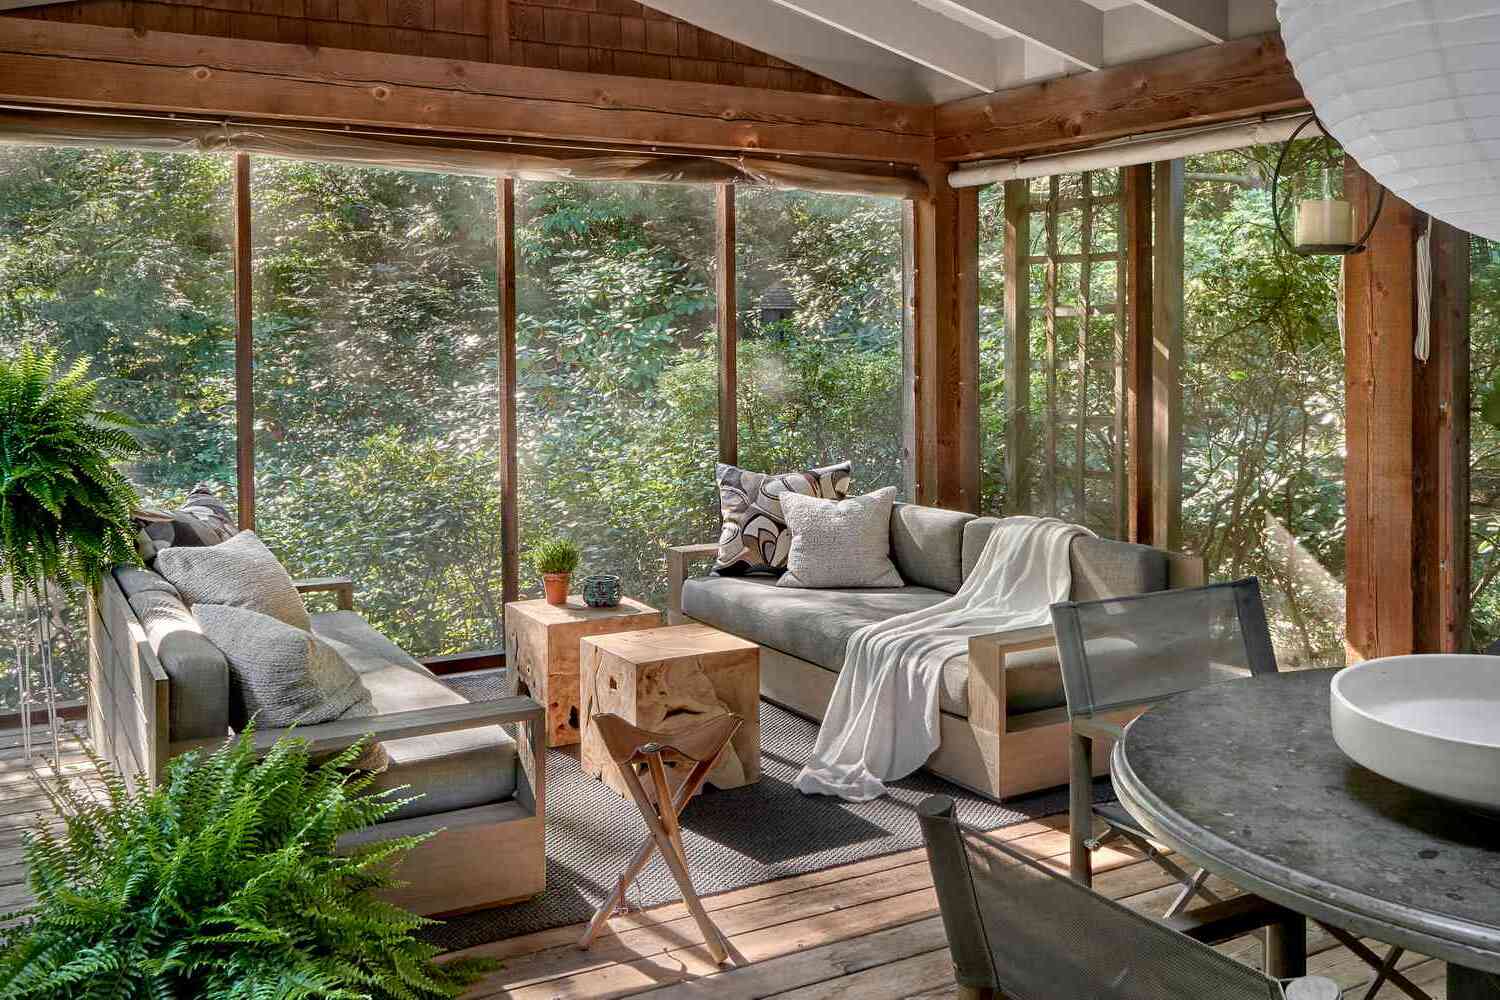 DIY Screened In Porch: Transform Your Outdoor Space